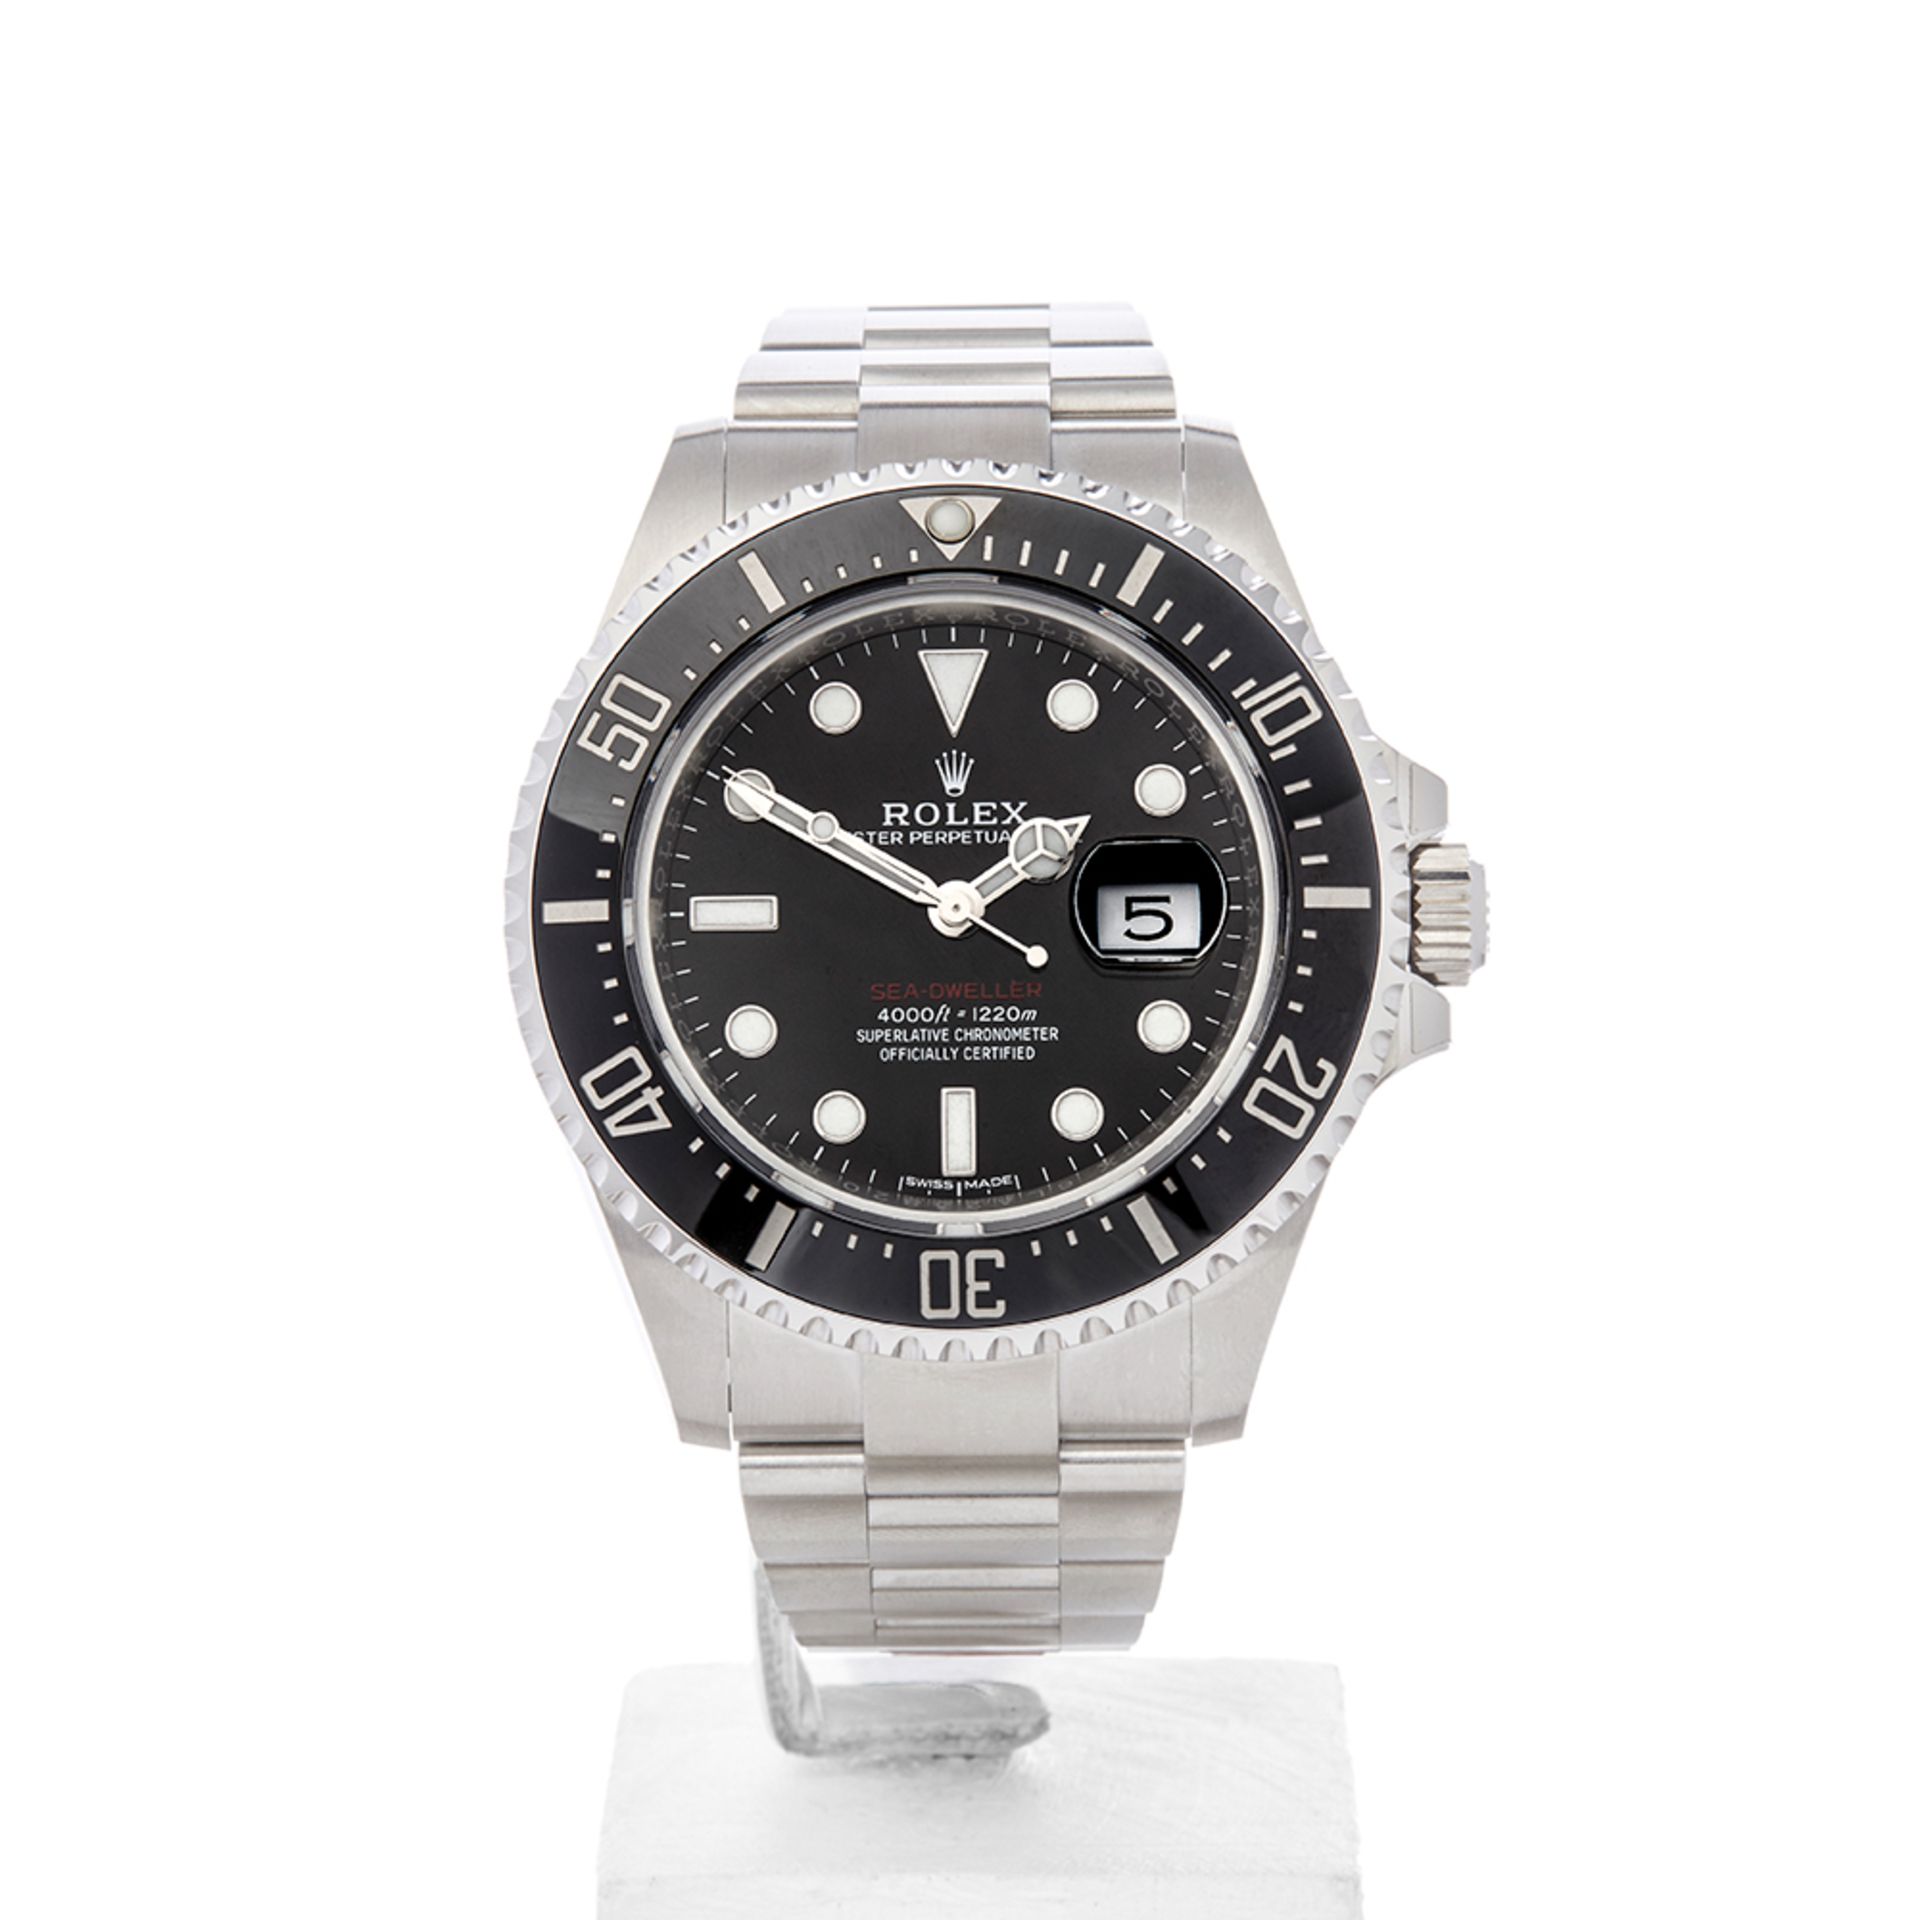 Rolex Sea-dweller 43mm Stainless Steel 126600 - Image 2 of 8